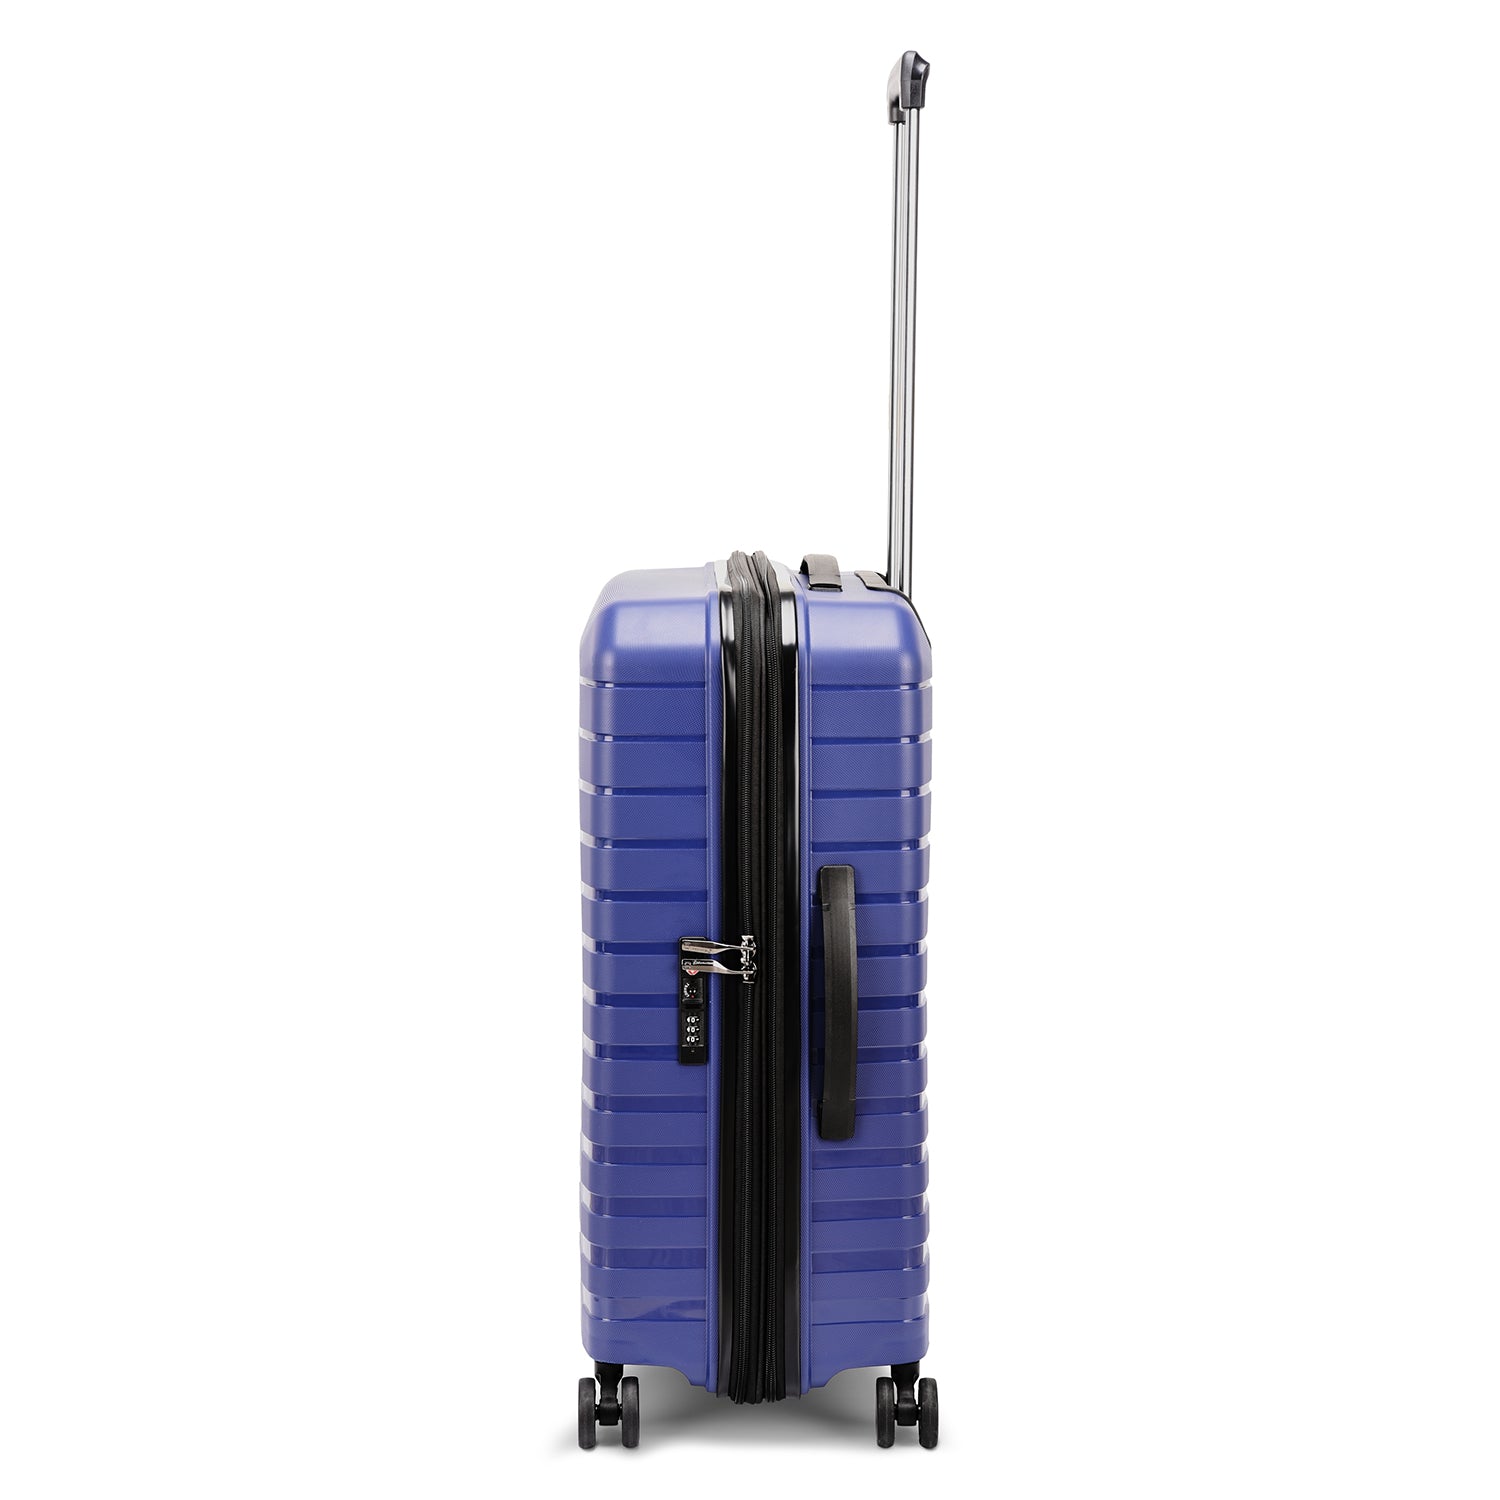 Echolac Lordnorth 68cm Hardcase Expandable 4 Double Wheel Check-In Luggage Trolley Turkish Tile - PPT008 - 24 TURKISH TILE